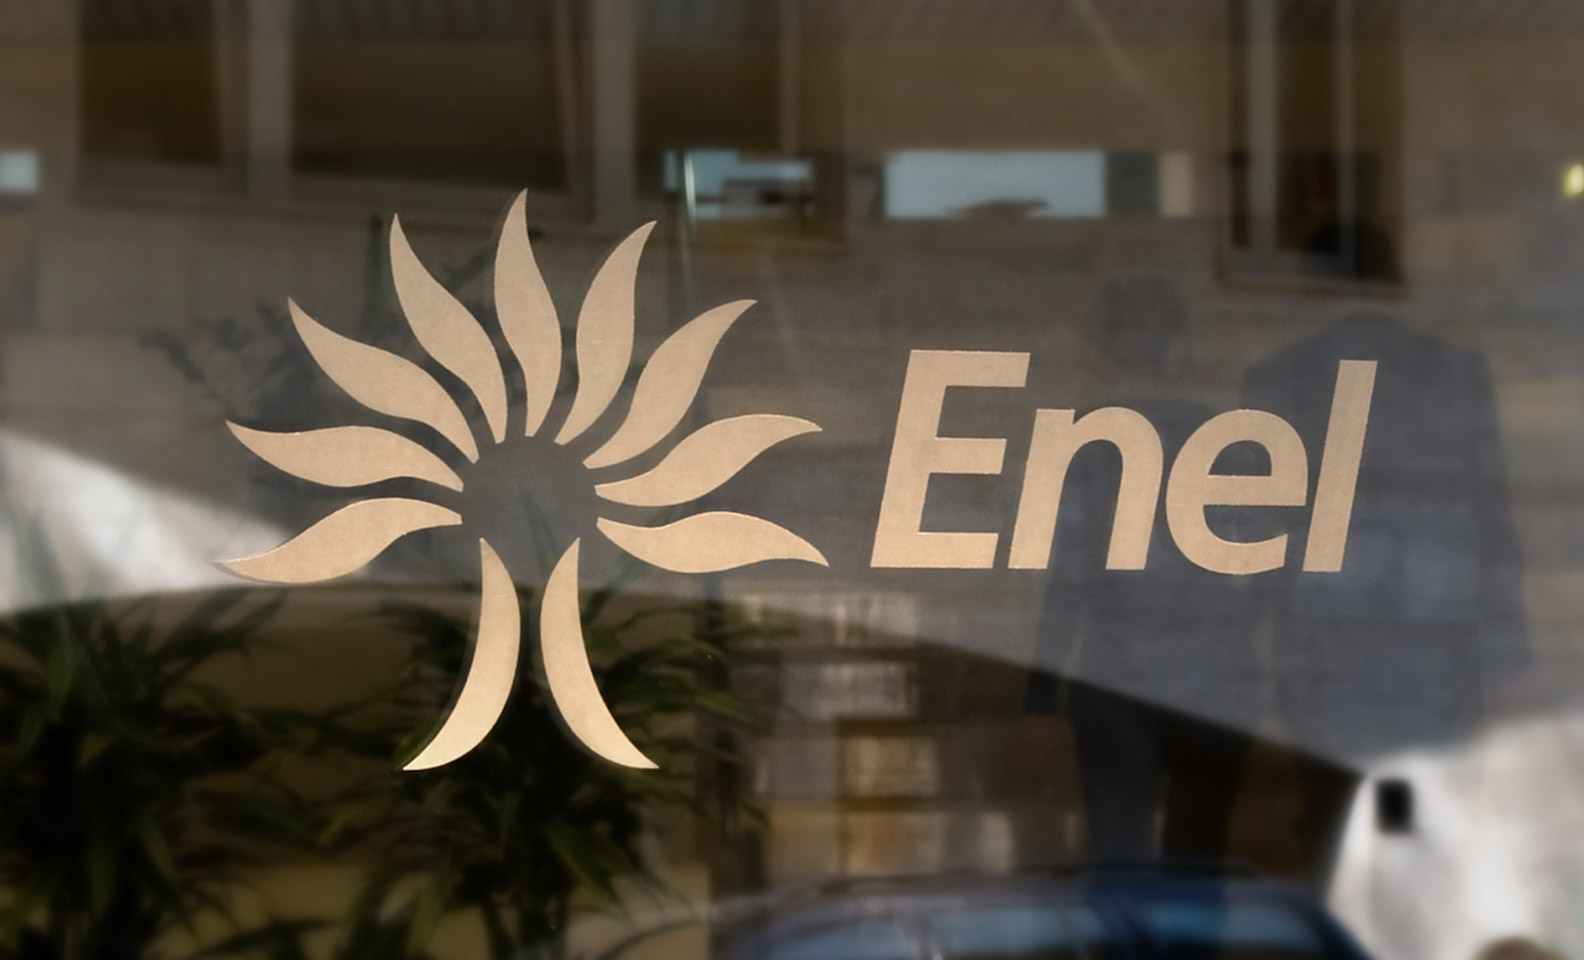 The new Open Power approach to consolidate Enel's leadership in the energy  of the future